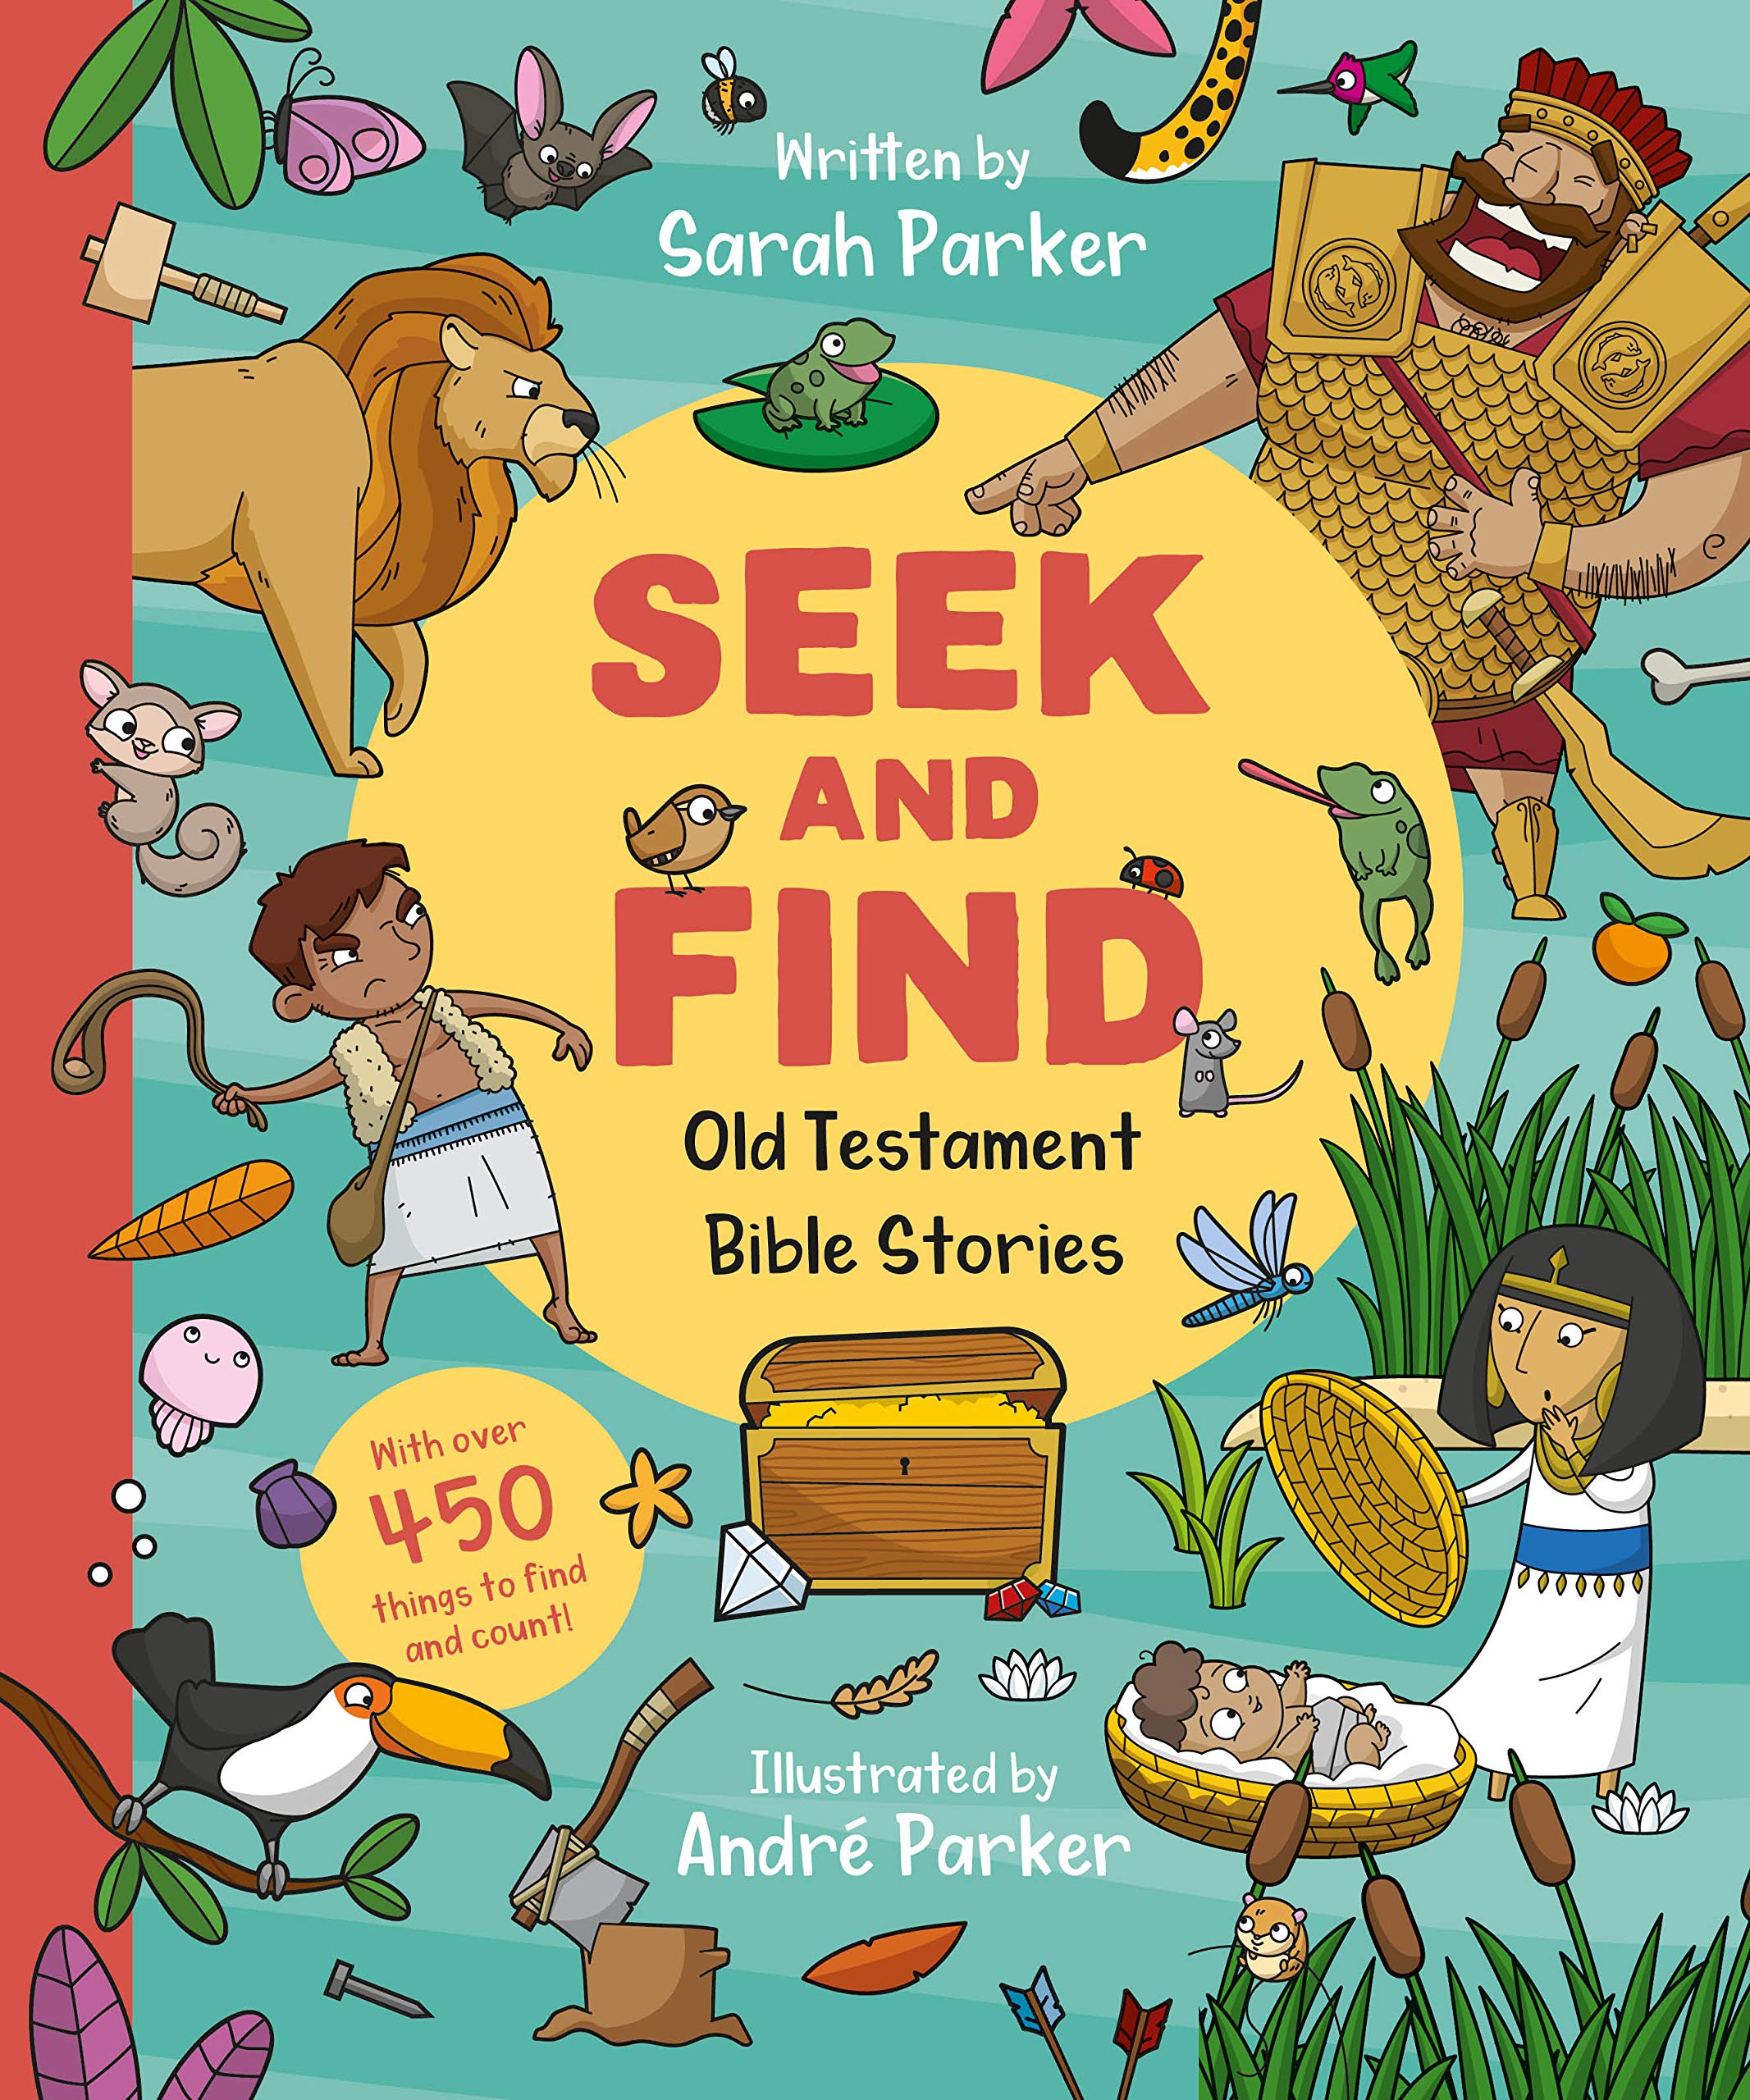 Seek and Find: Old Testament Bible Stories: With over 450 things to find and count! (Fun interactive Christian book to gift kids ages 2-4)